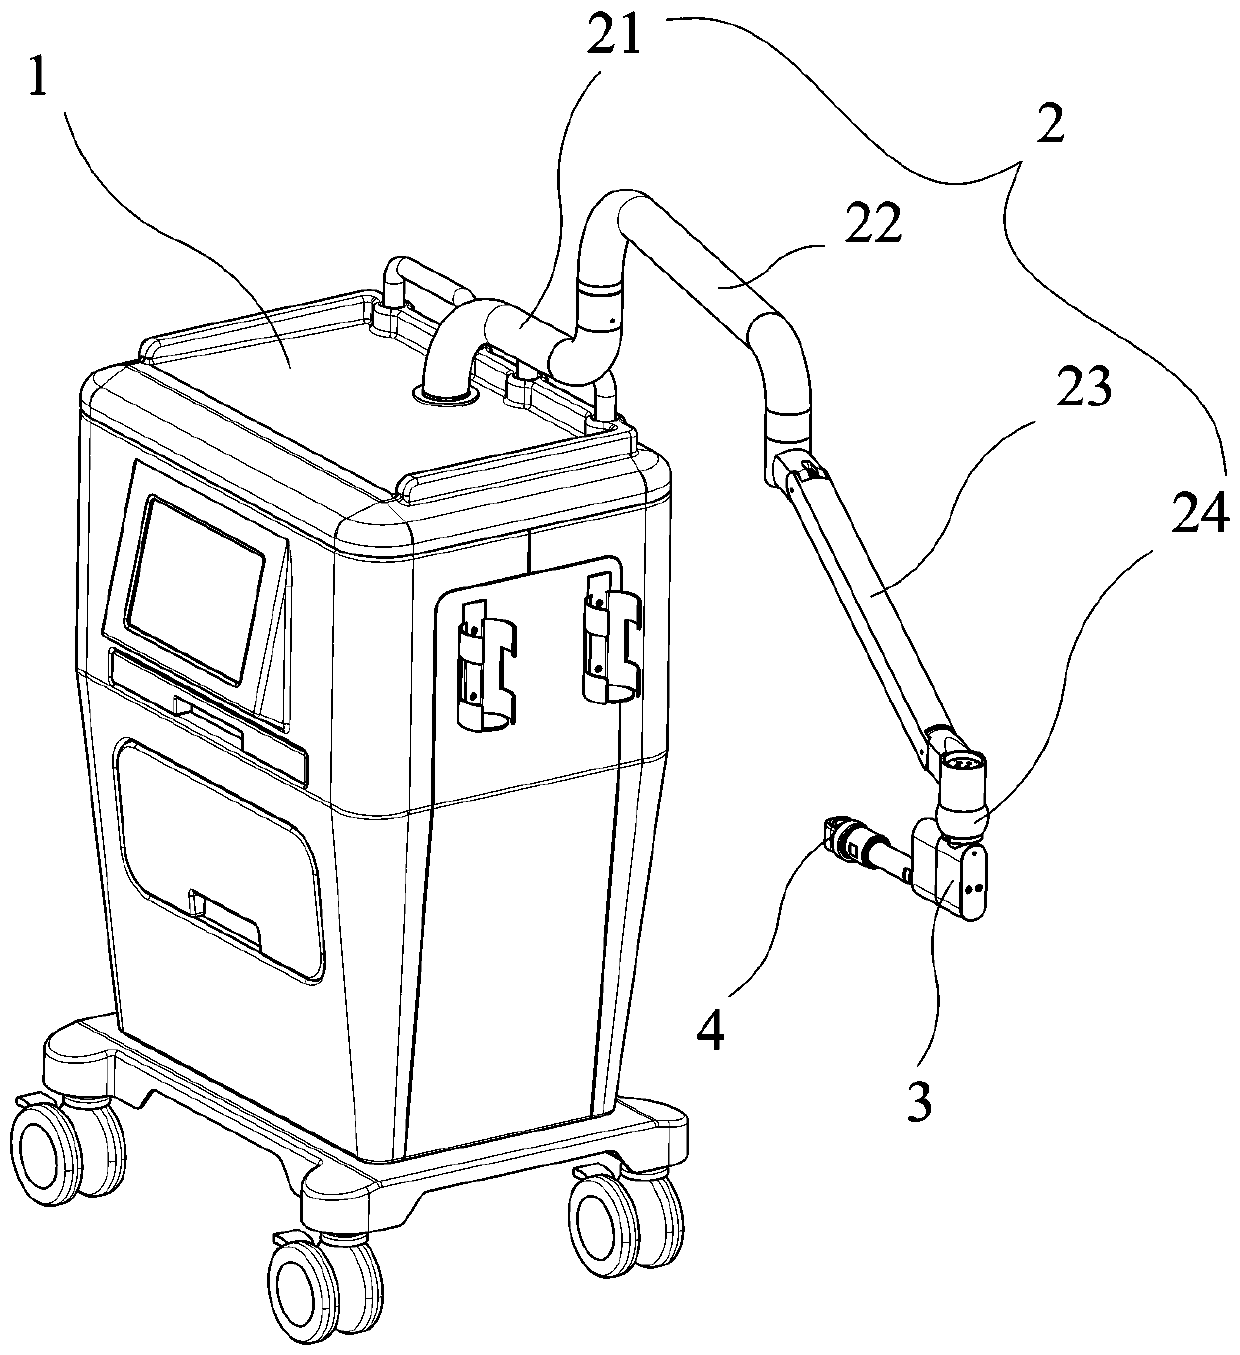 Shockwave therapy apparatus